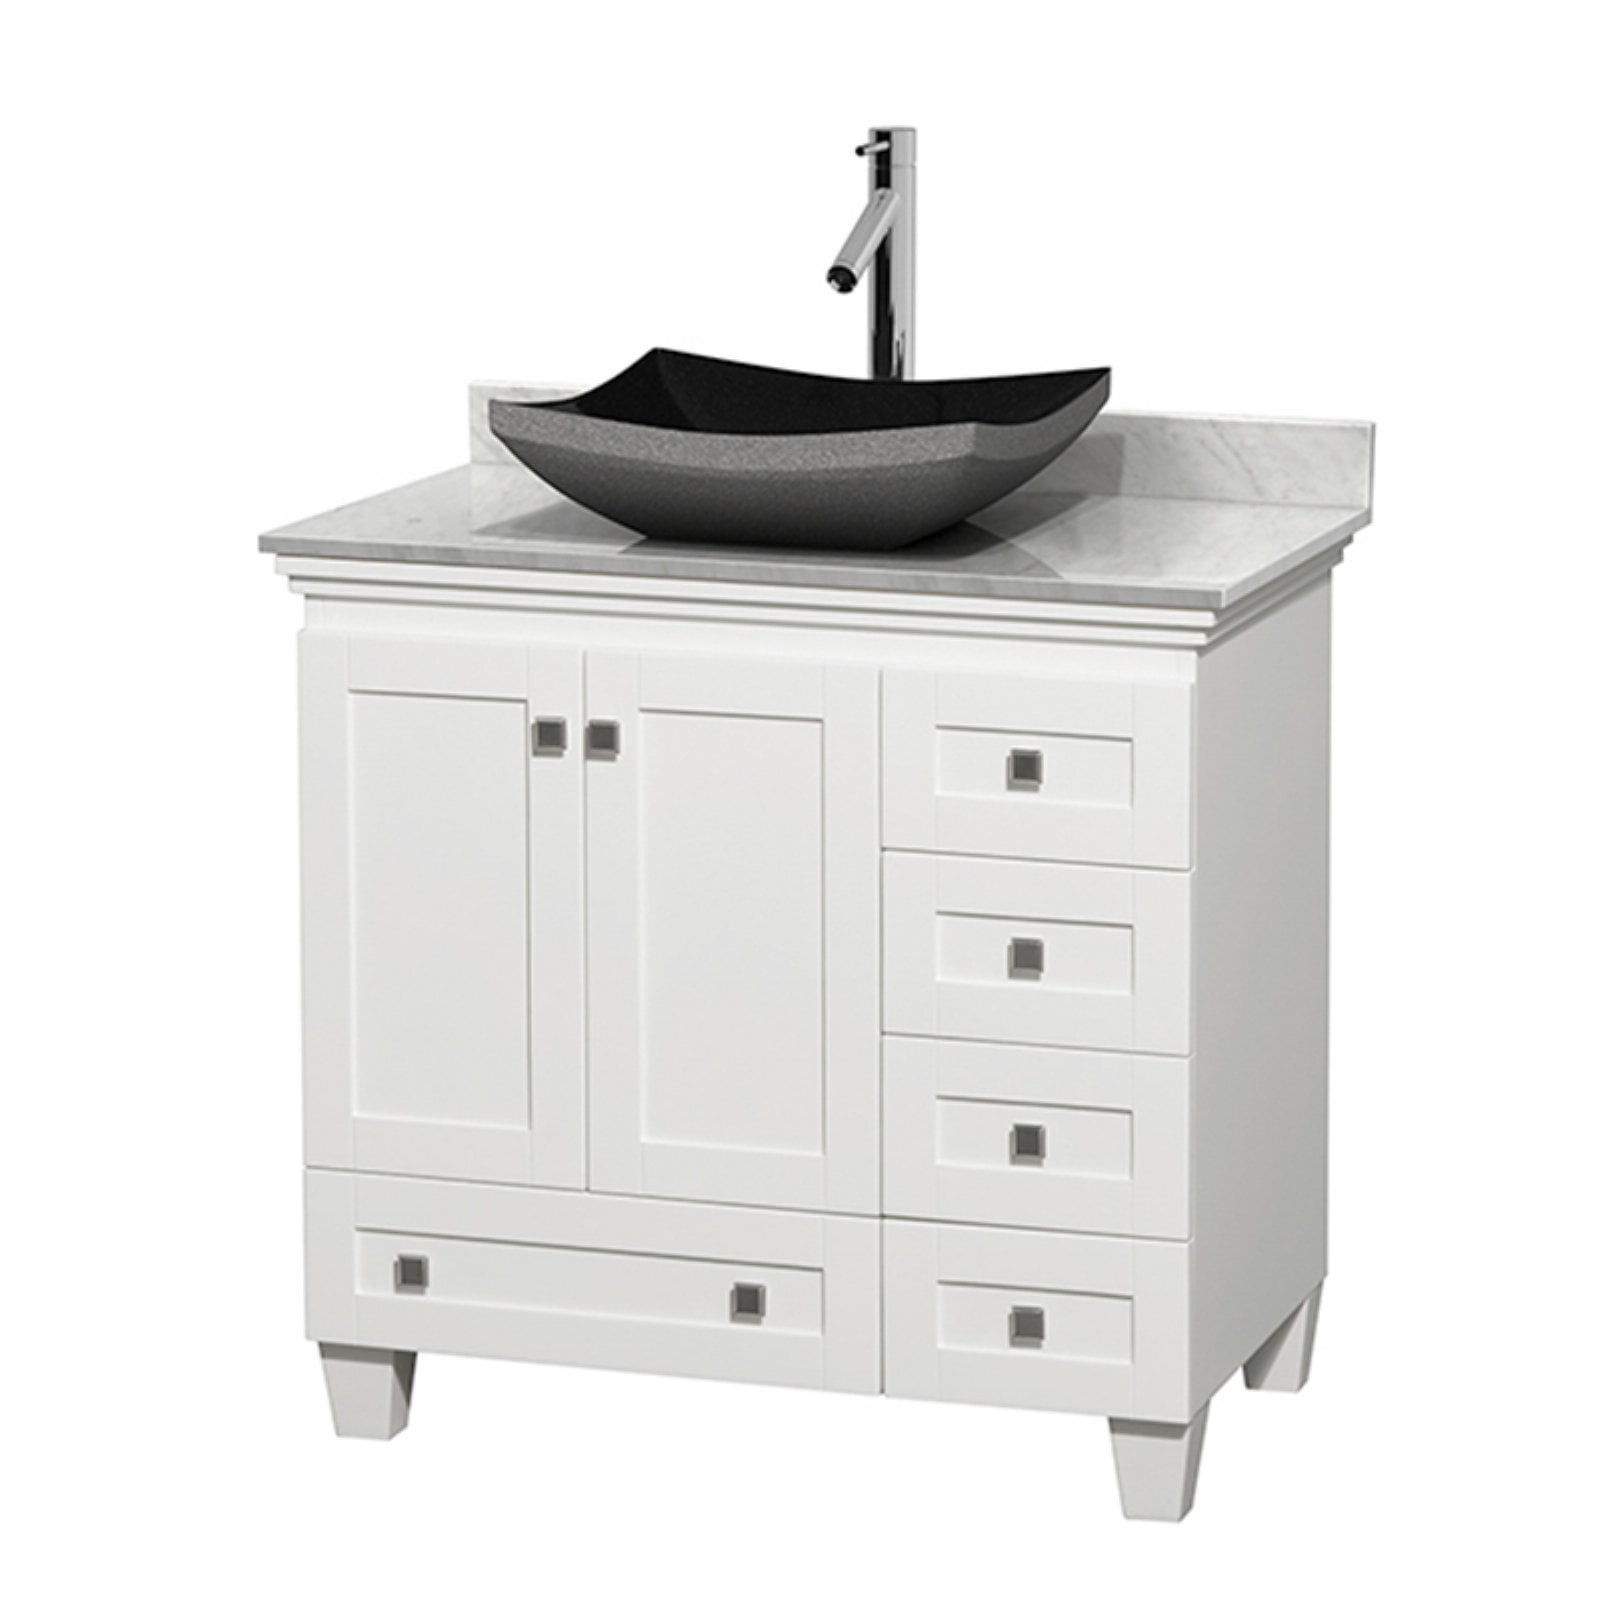 Wyndham Collection Acclaim 36 inch Single Bathroom Vanity in White, White Carrera  Marble Countertop, Pyra Bone Porcelain Sink, and 24 inch Mirror -  